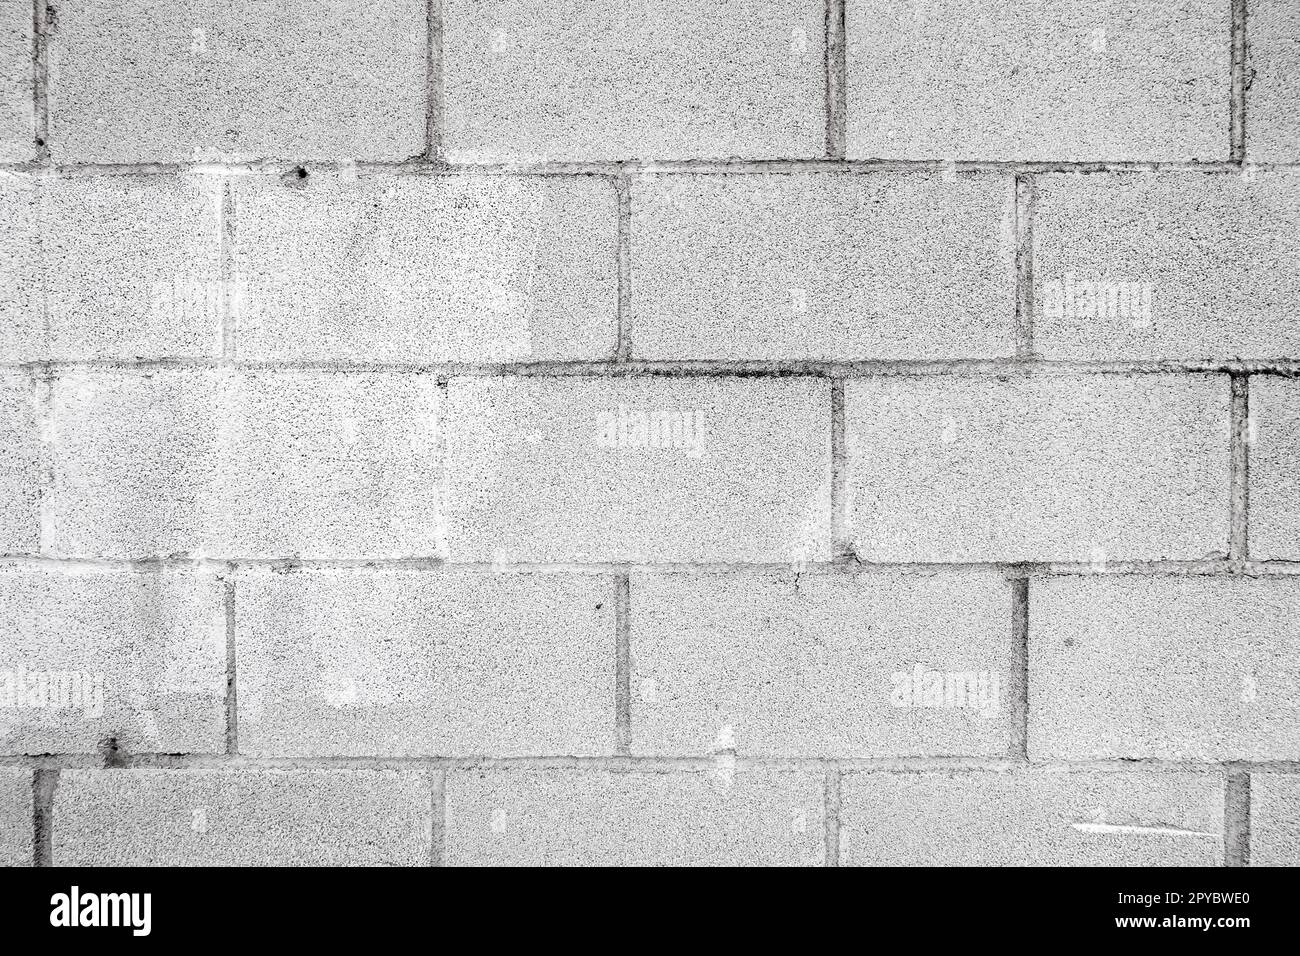 Cinder block wall background texture Stock Photo